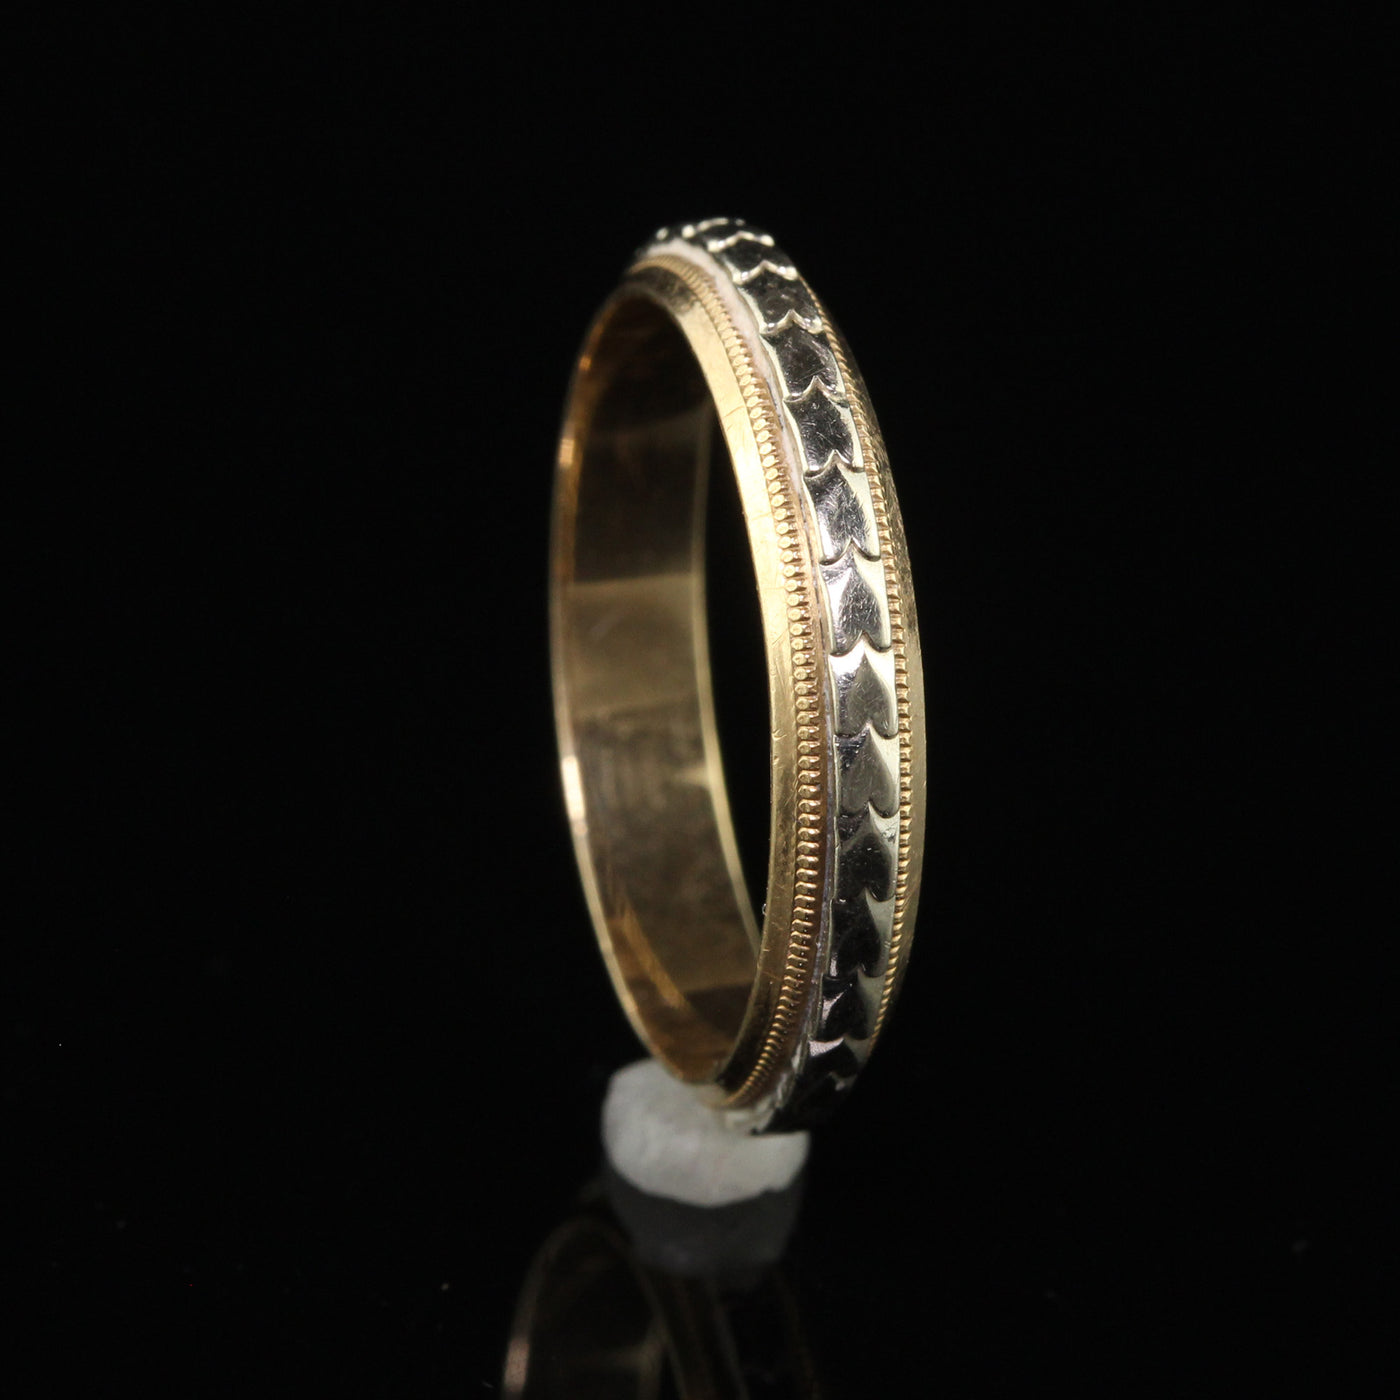 Antique Art Deco 14K Yellow Gold Two Tone Heart Engraved Heart Wedding Band - Size 7 1/4